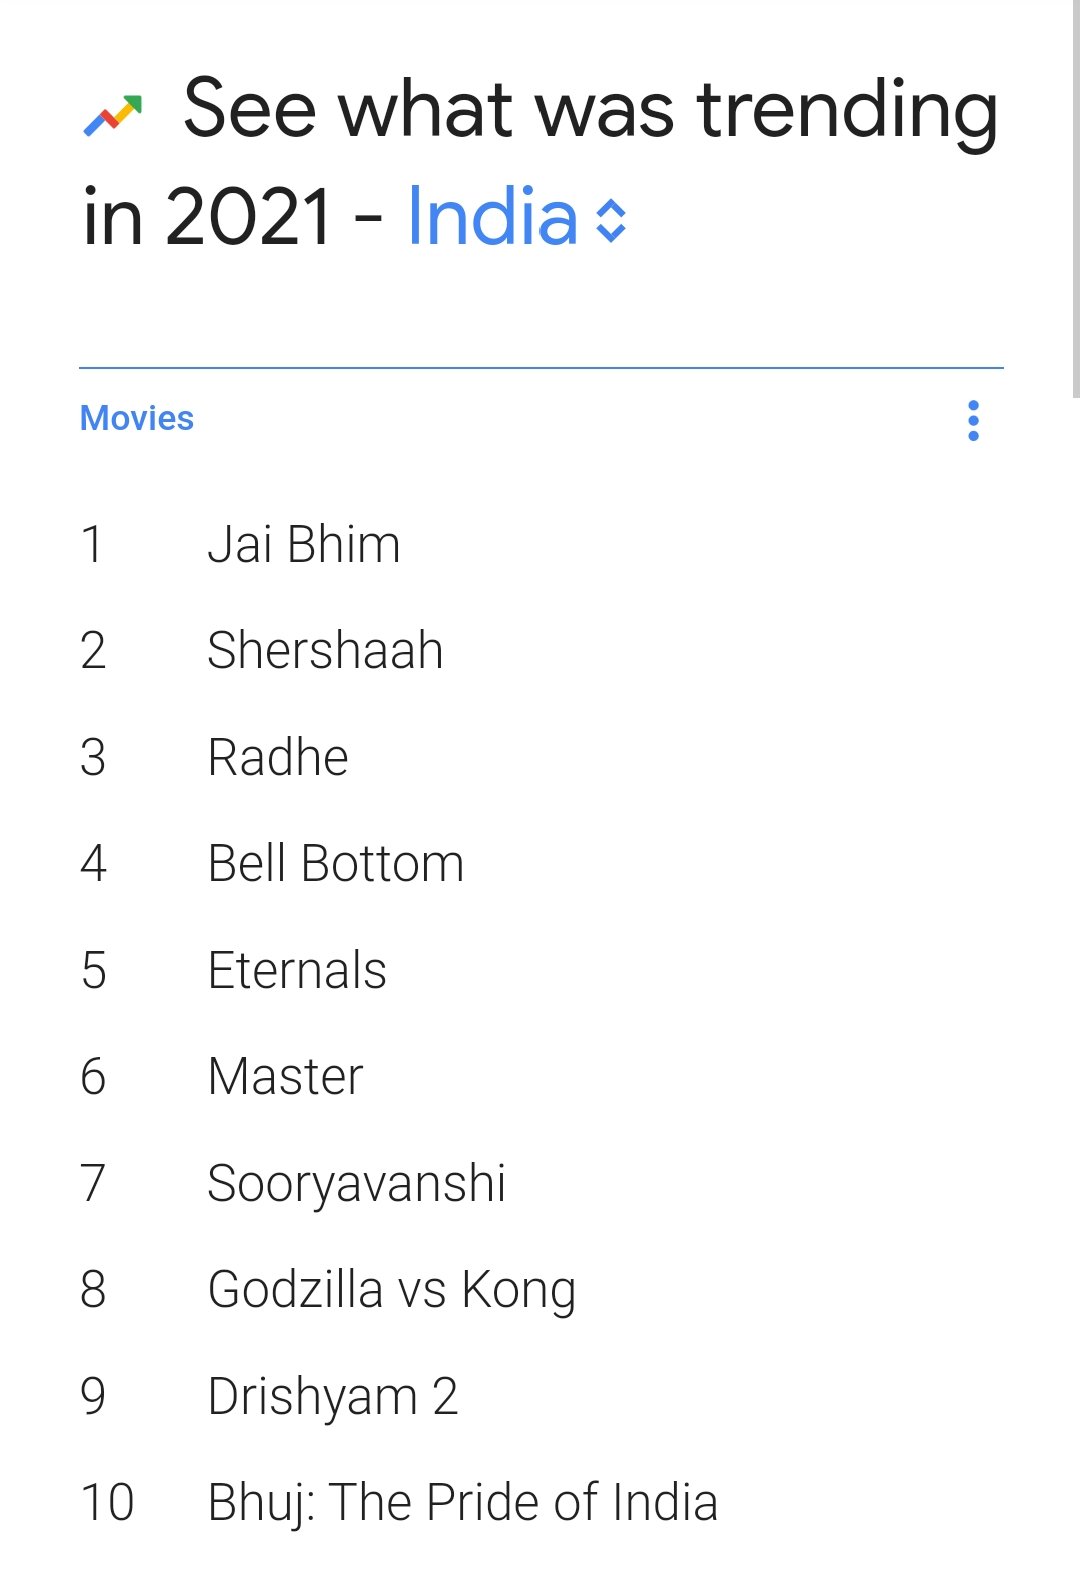 Jai Bhim and Master Movie Tops Google Search Trends